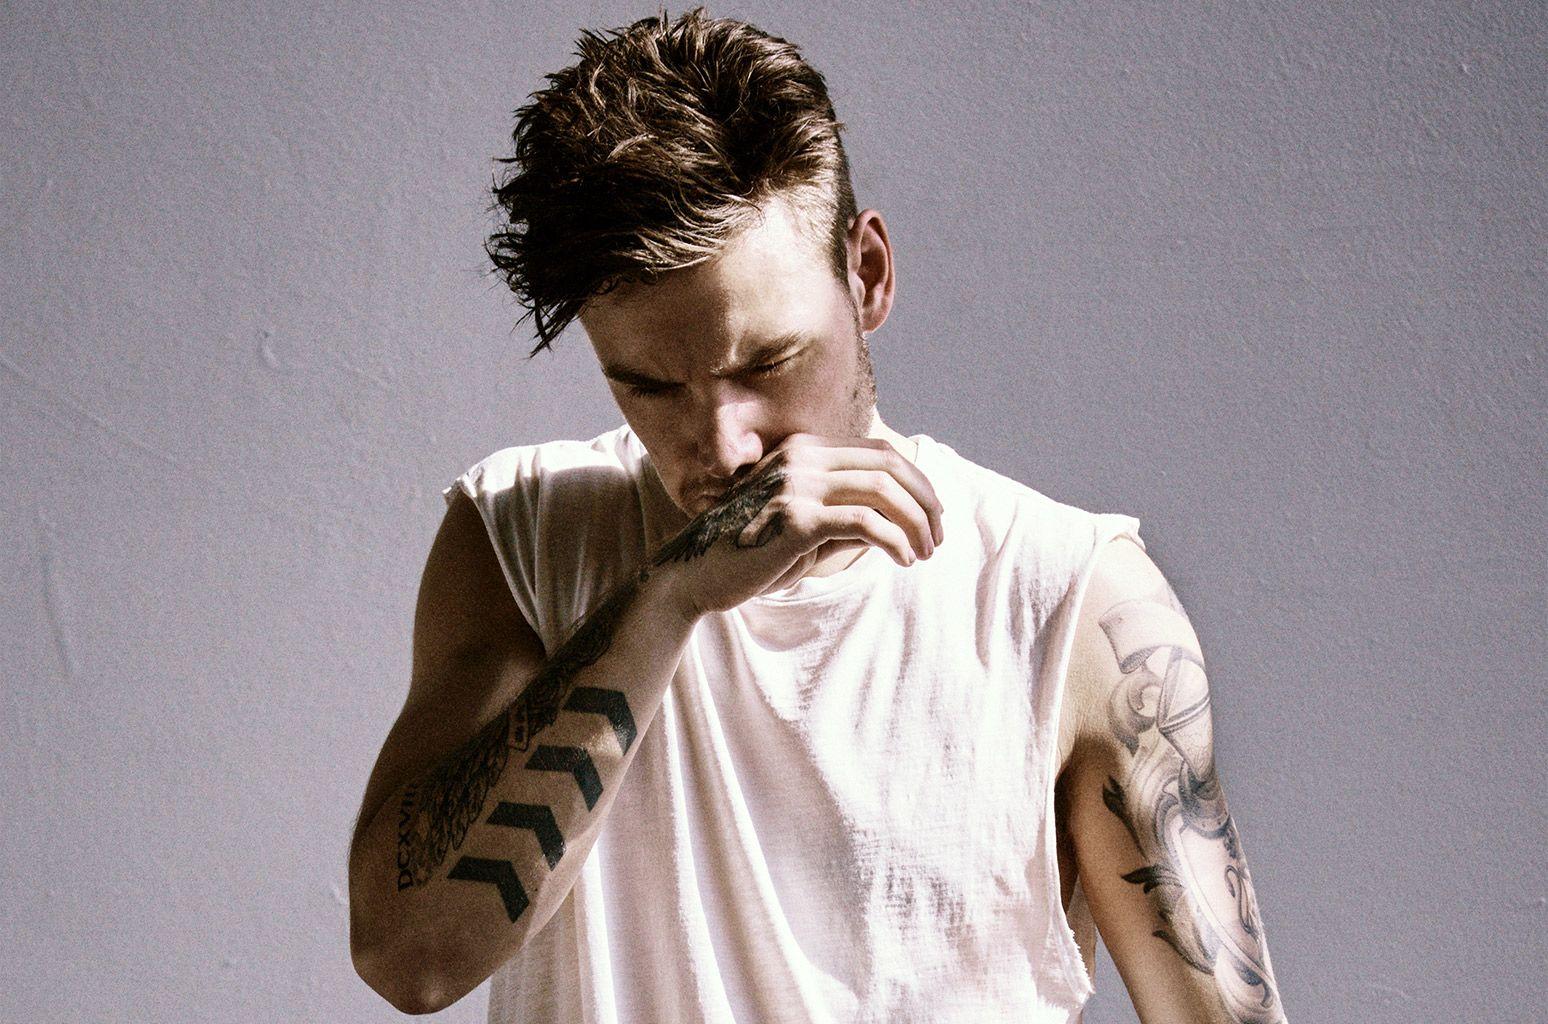 Liam Payne Releases Tropical New Single 'Bedroom Floor' With Vibey